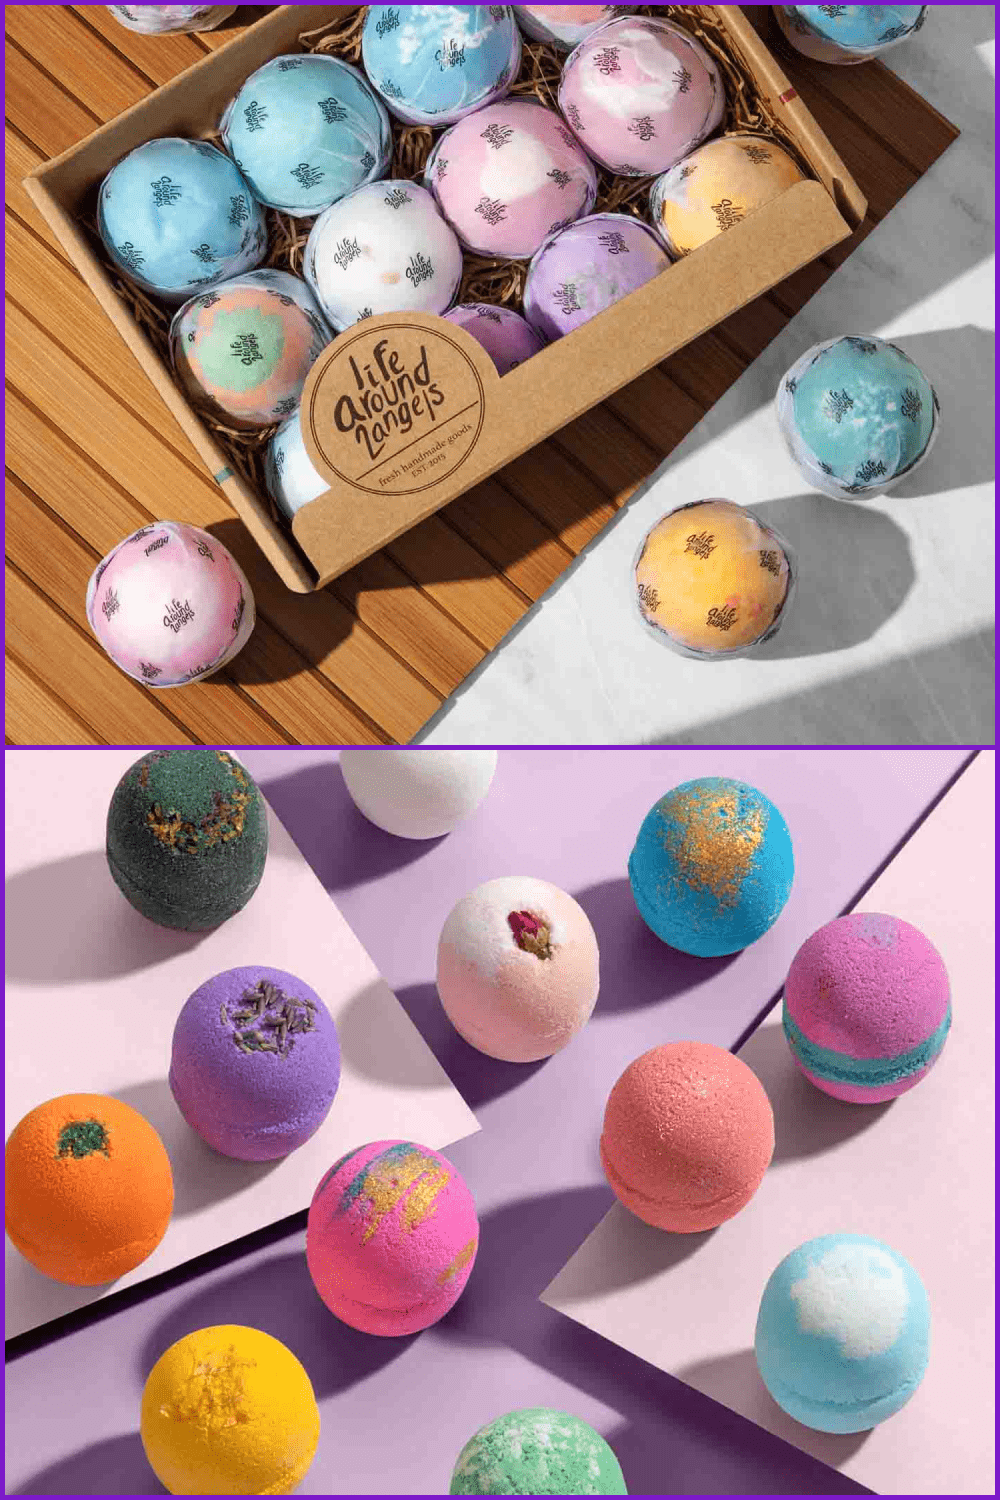 Box with a cute colorful bath bombs.